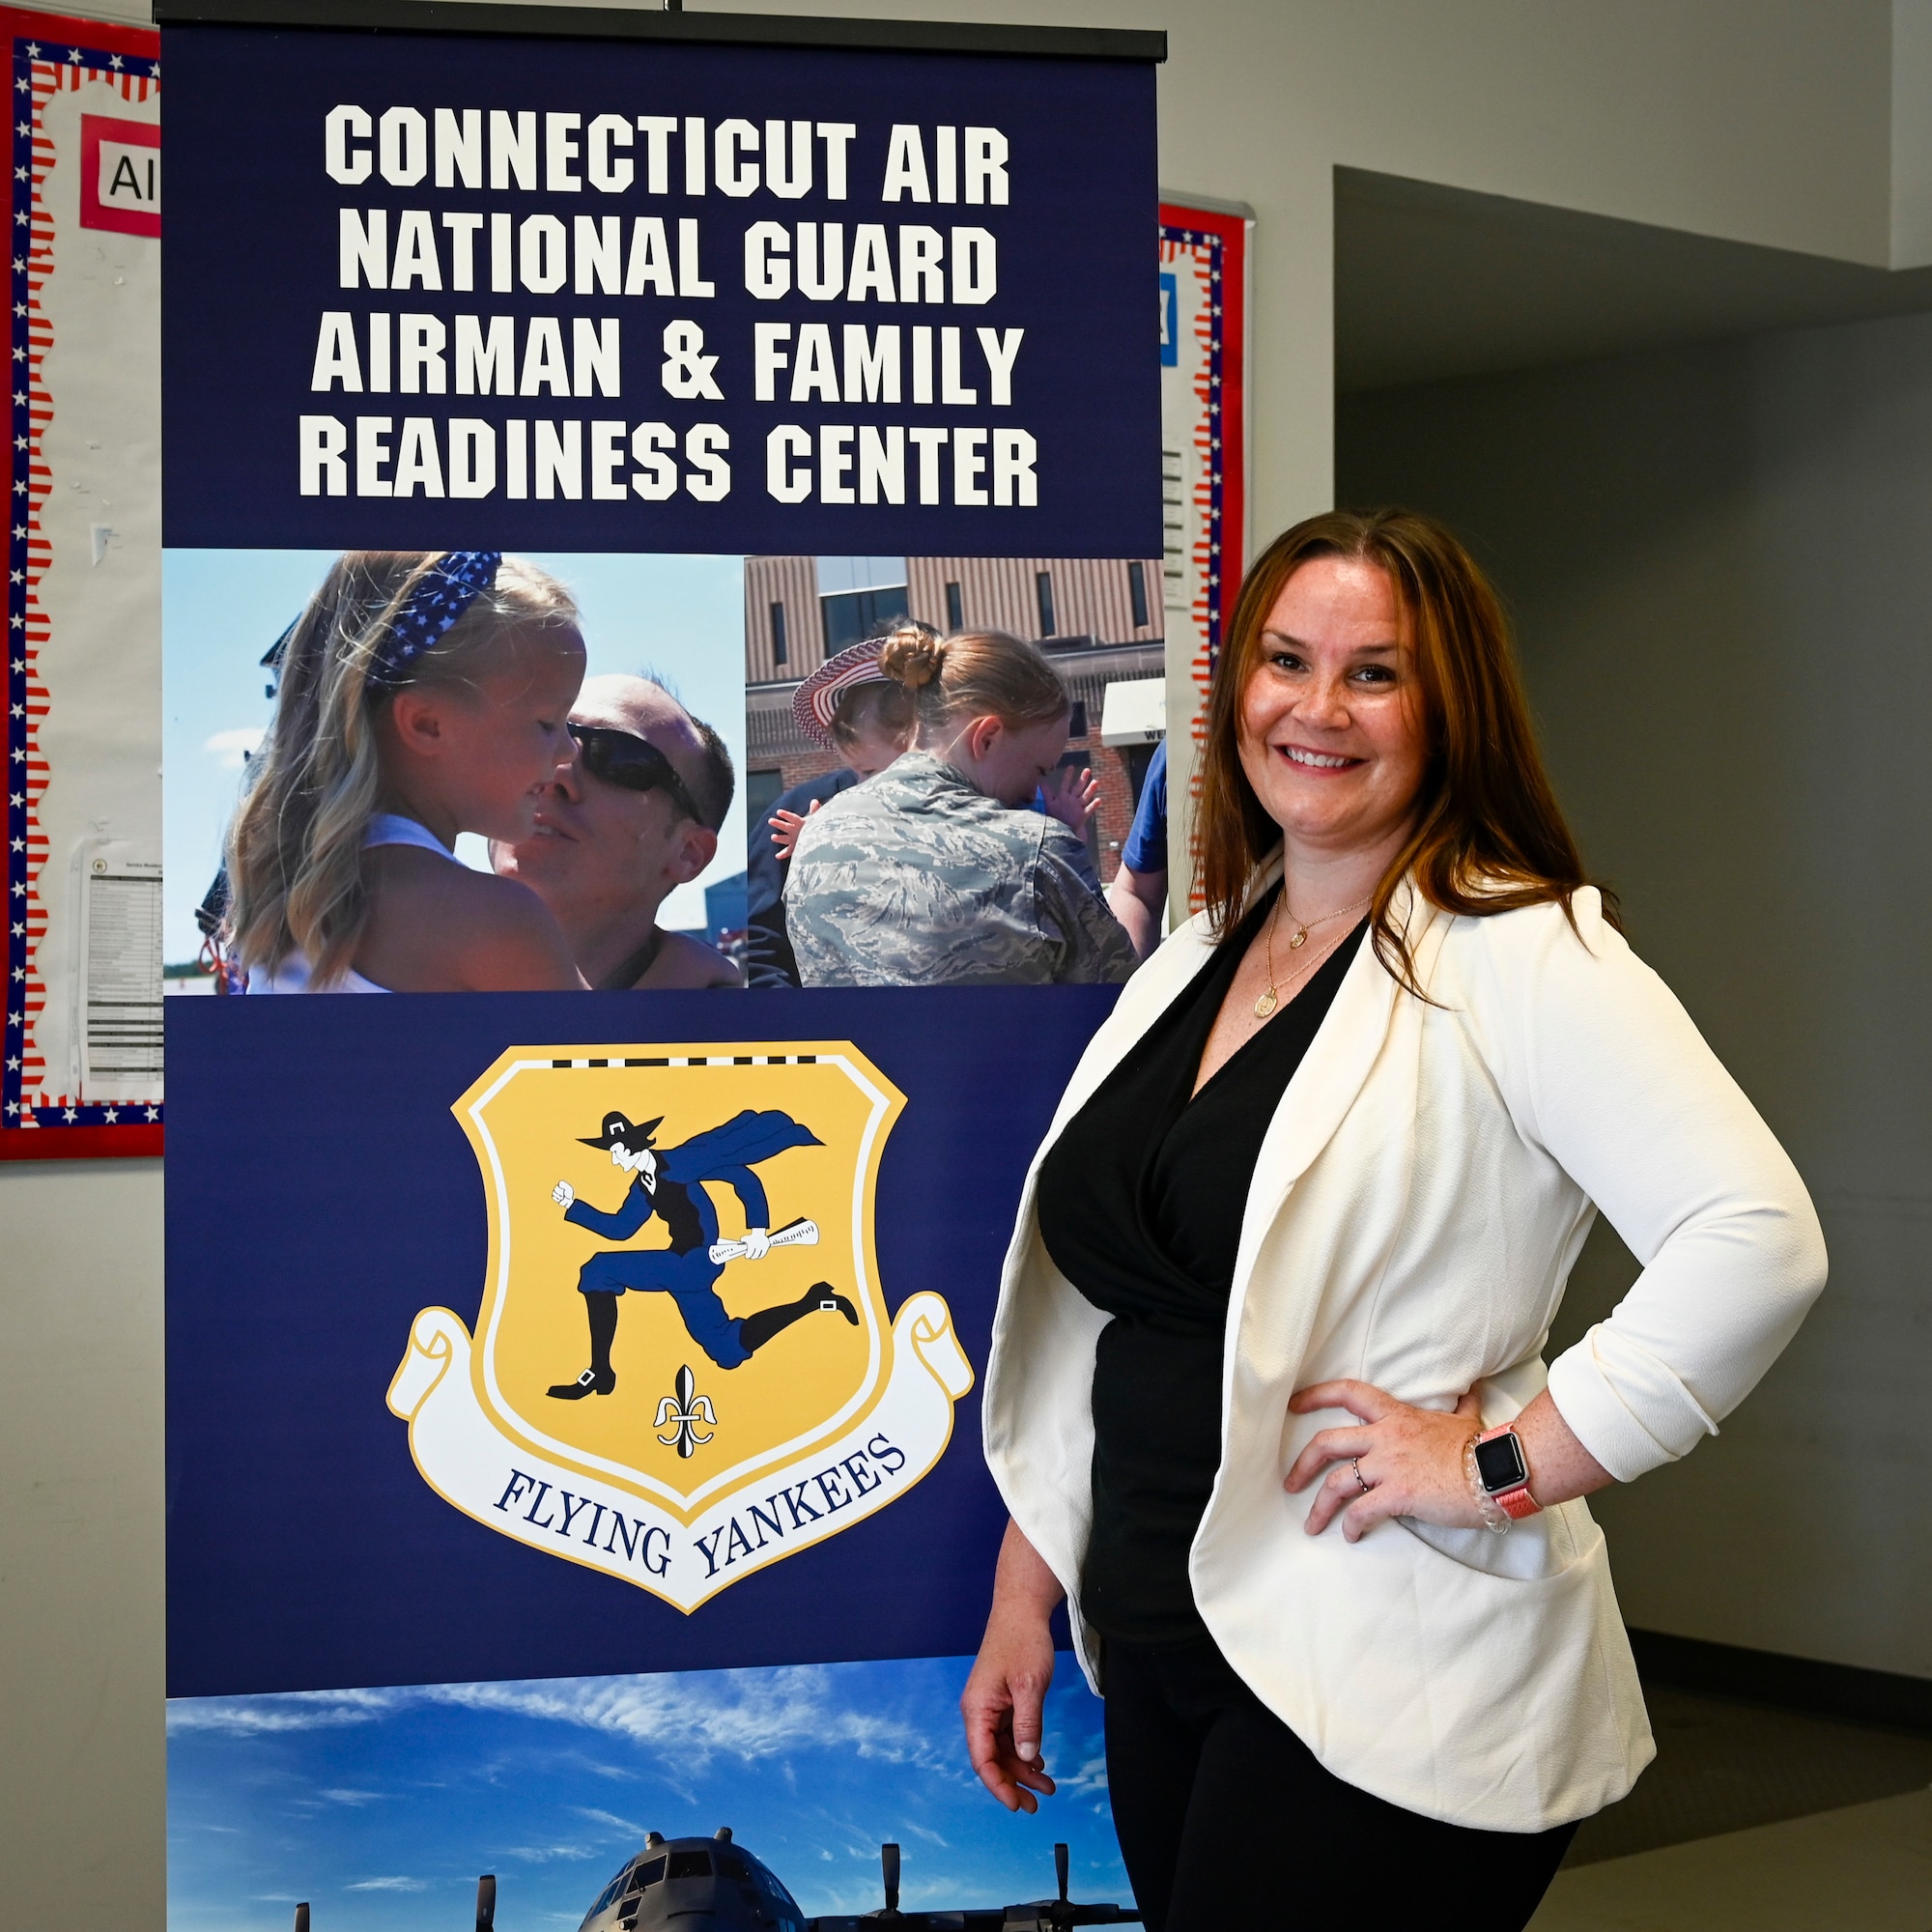 Kasey Timberlake, 103rd Airlift Wing Airman and Family Readiness program manager, outside her office at Bradley Air National Guard Base in East Granby, Connecticut, May 25, 2021. The Airman and Family Readiness program supports members throughout their military life cycle, from student flight through retirement, and connects them and their families with helping resources throughout the various stages of their careers. (U.S. Air National Guard photo by Tech. Sgt. Steven Tucker)